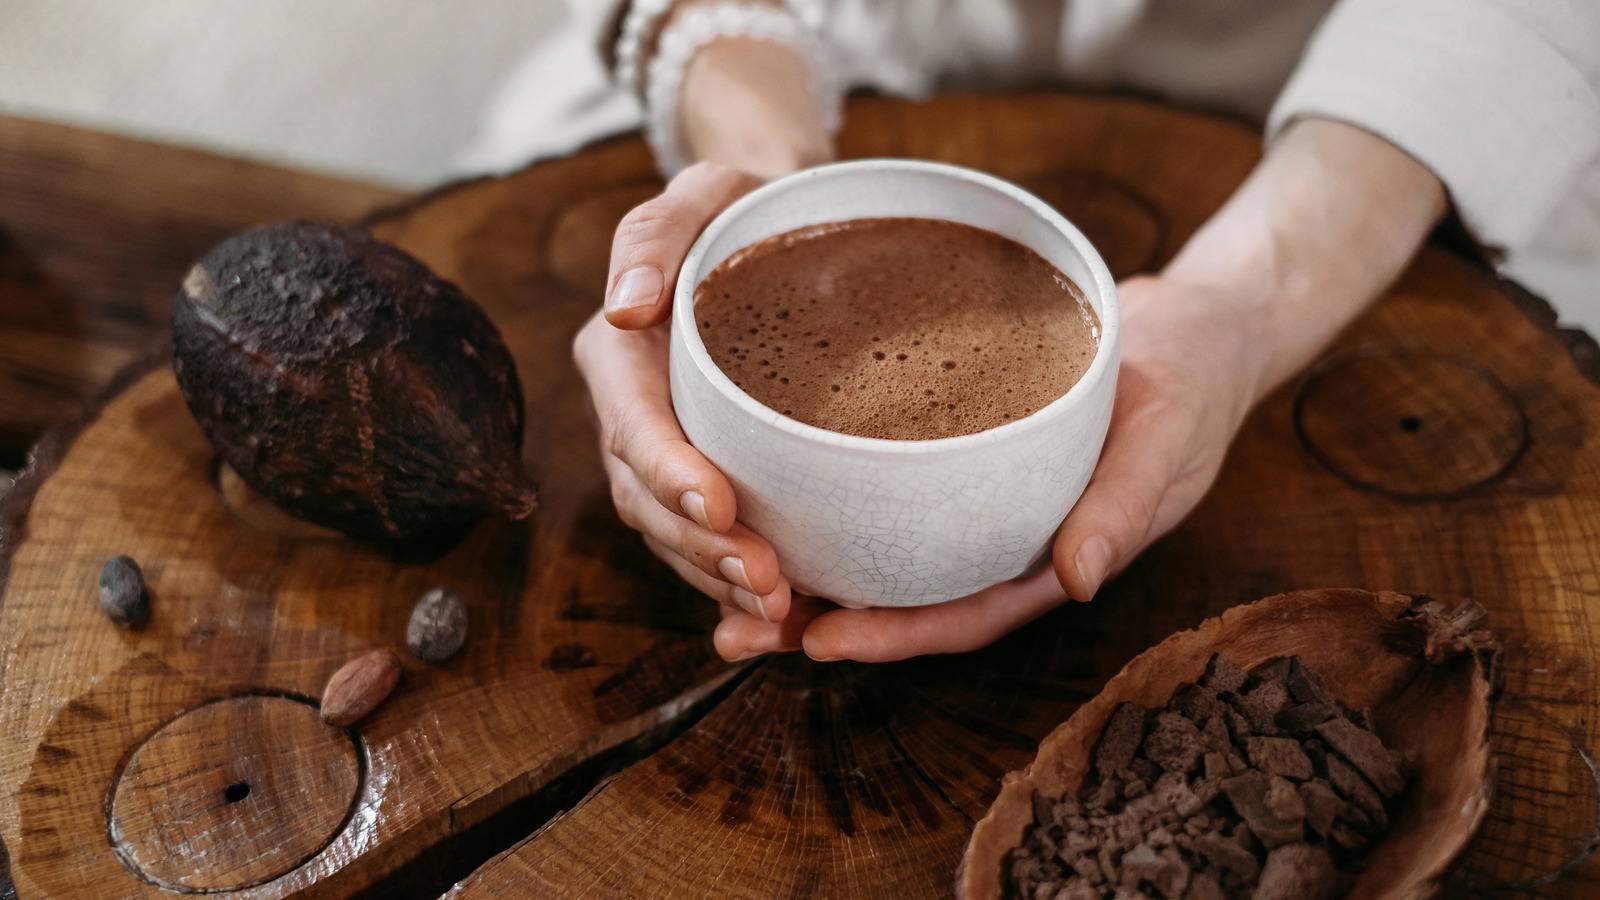 Is There A Difference Between Hot Cocoa And Hot Chocolate?